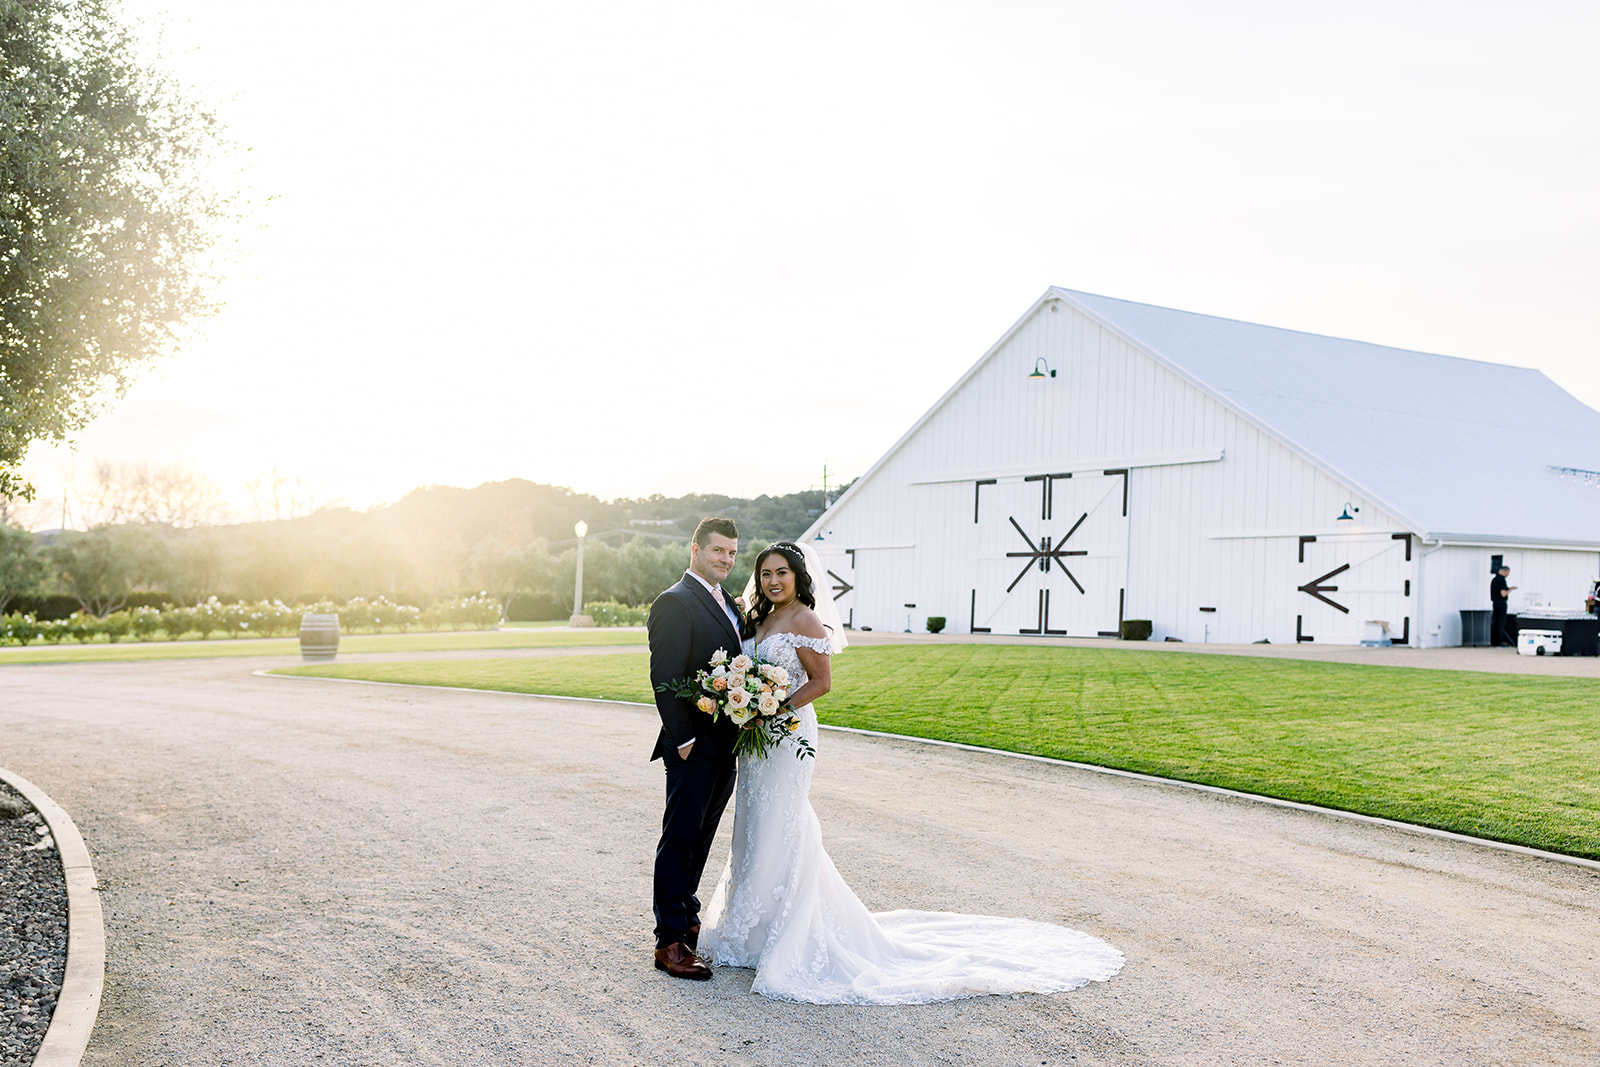 Chris and Rhoda's love story unfolds in the scenic beauty of the White Barn, captured in this heartfelt photograph